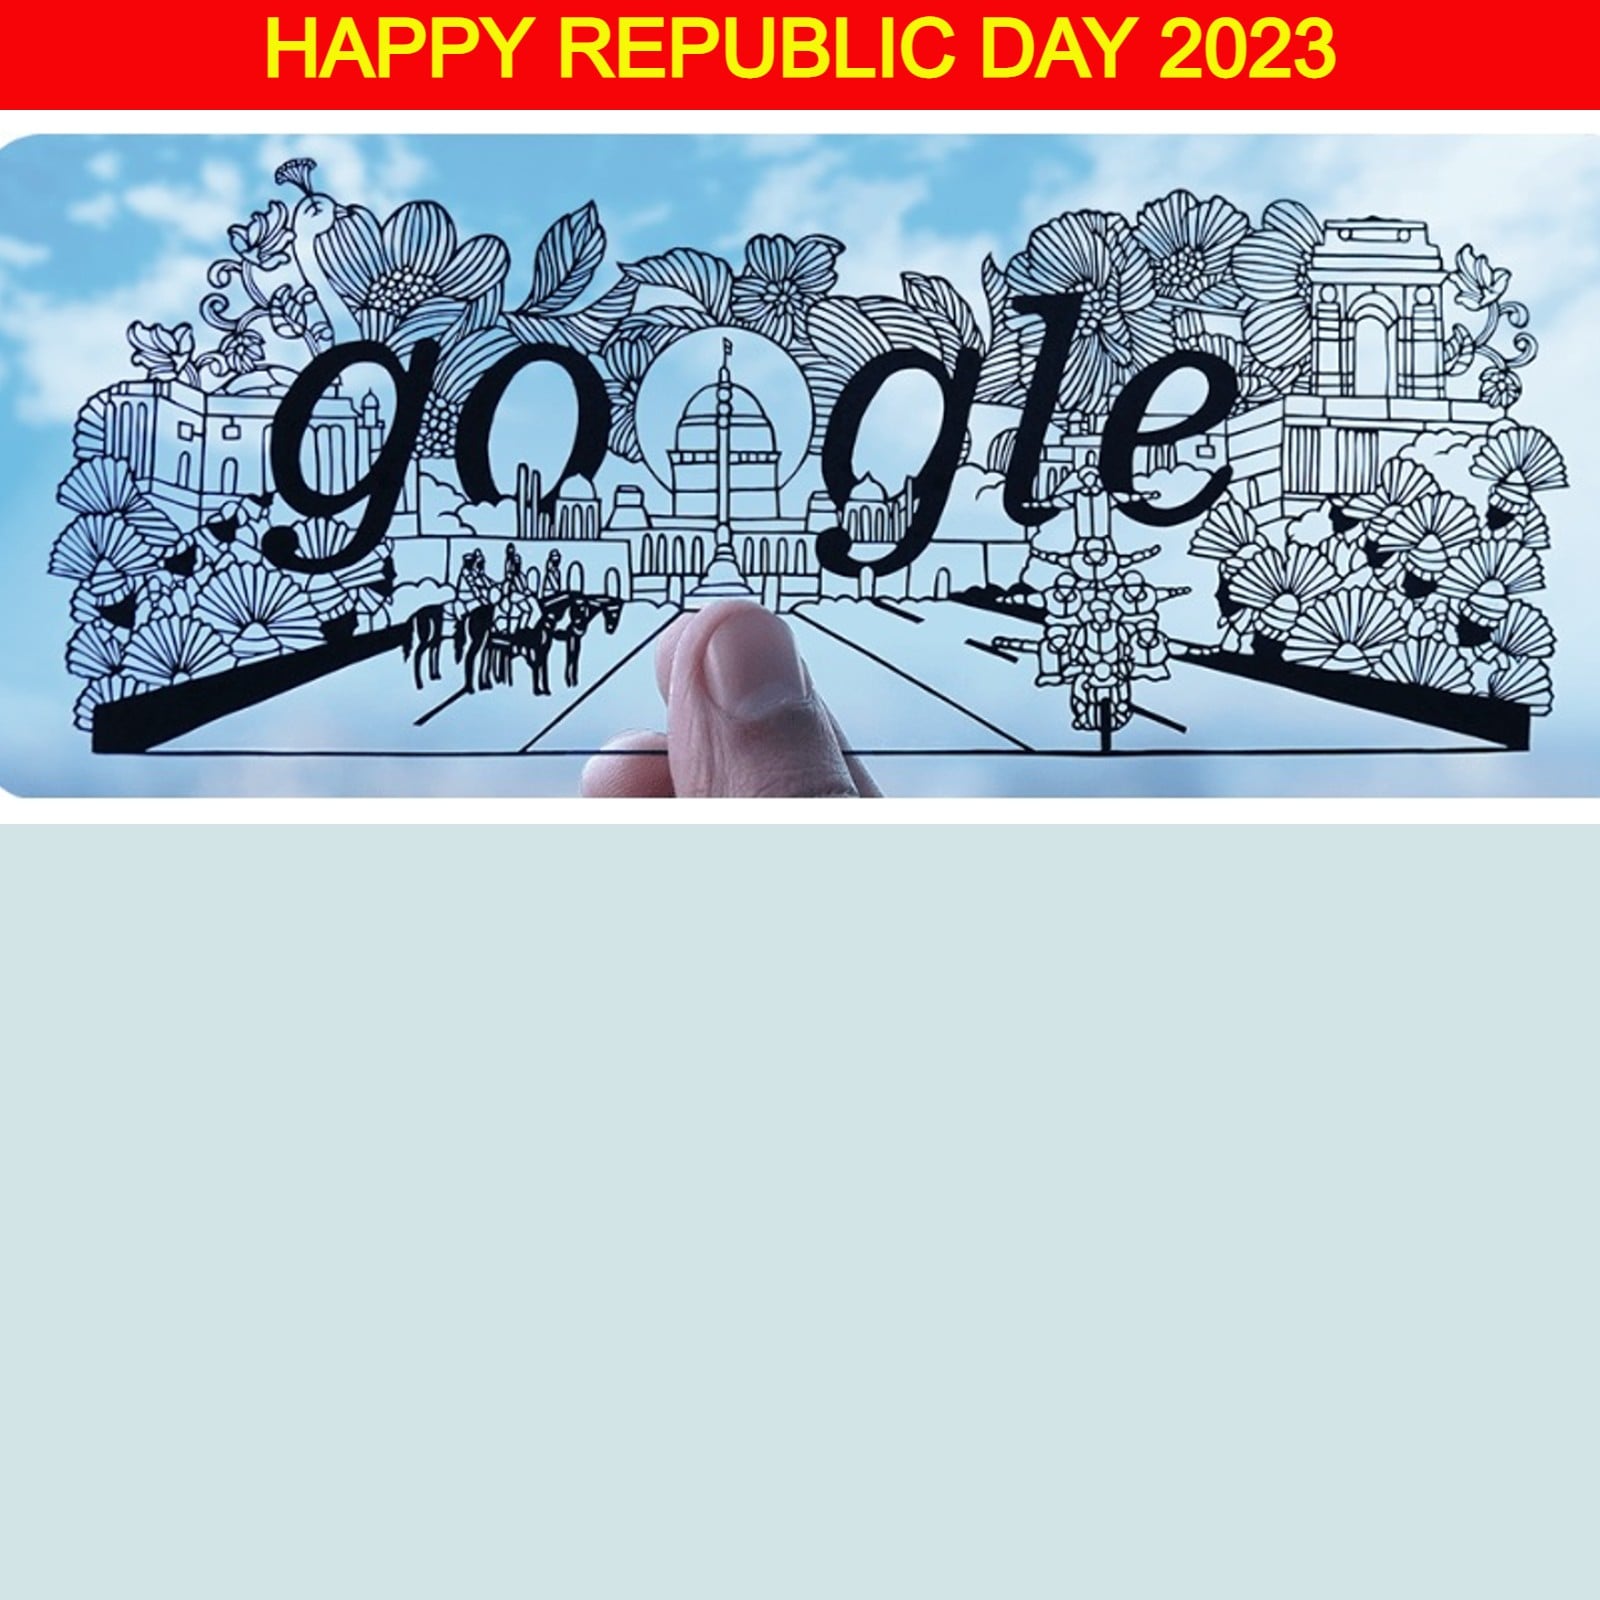 Share more than 200 republic day related drawings latest